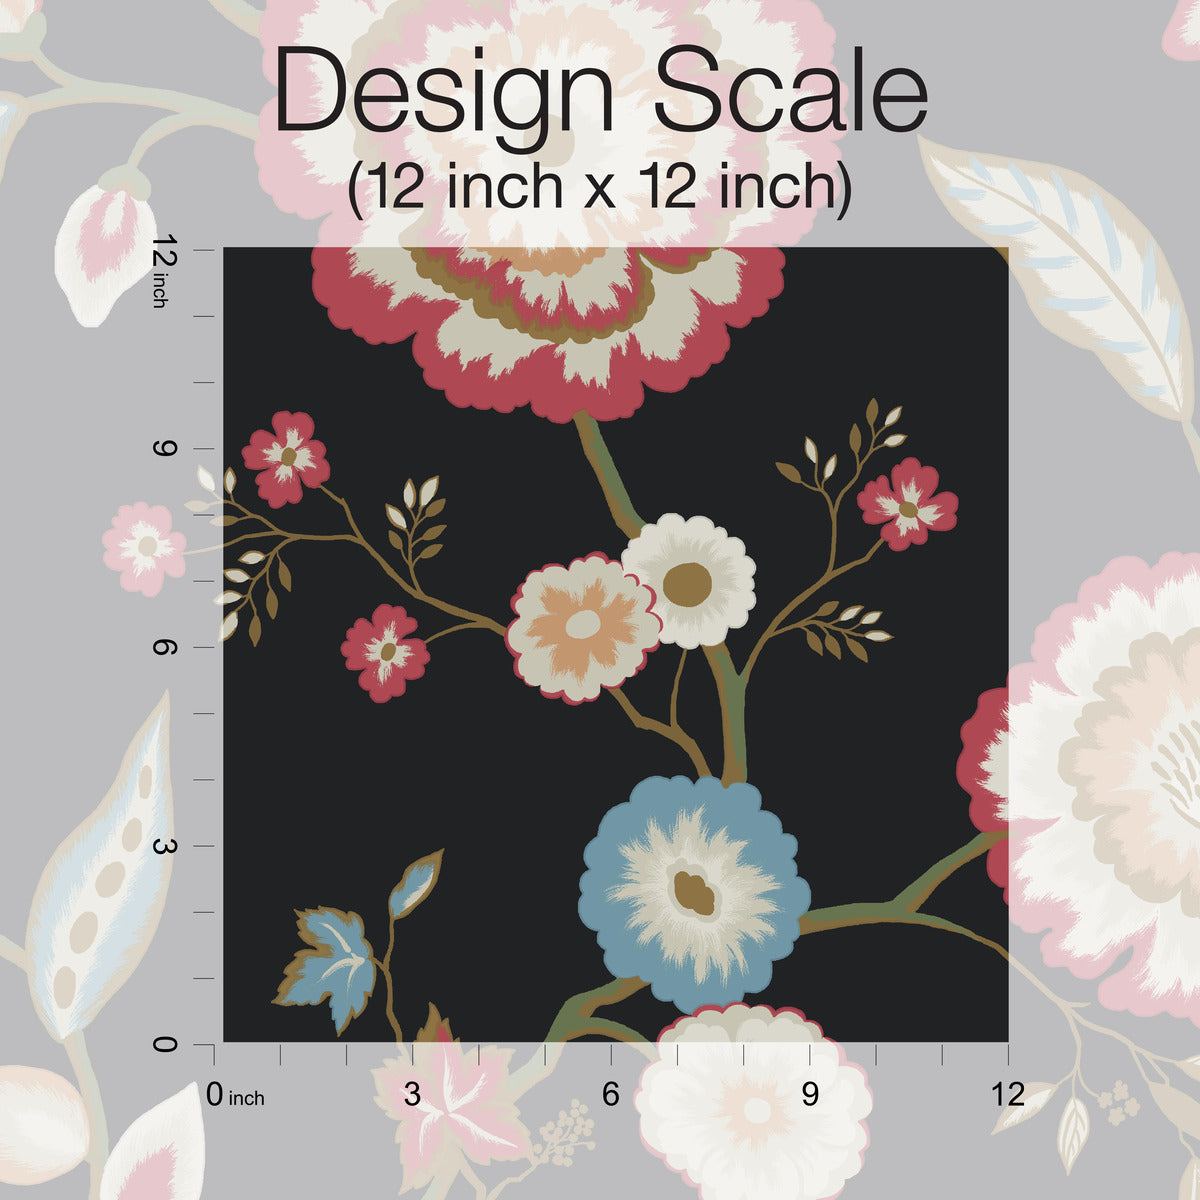 A design scale chart showing a 12 inch by 12 inch square section of a York Wallcoverings Dahlia Blooms Midnight/Multi Wallpaper Black, Pink (60 Sq.Ft.) with large flowers in red, beige, blue, and white on a black background. The botanical elegance is enhanced by smaller, more subtle floral outlines. Measurement markings are on two sides of the square.